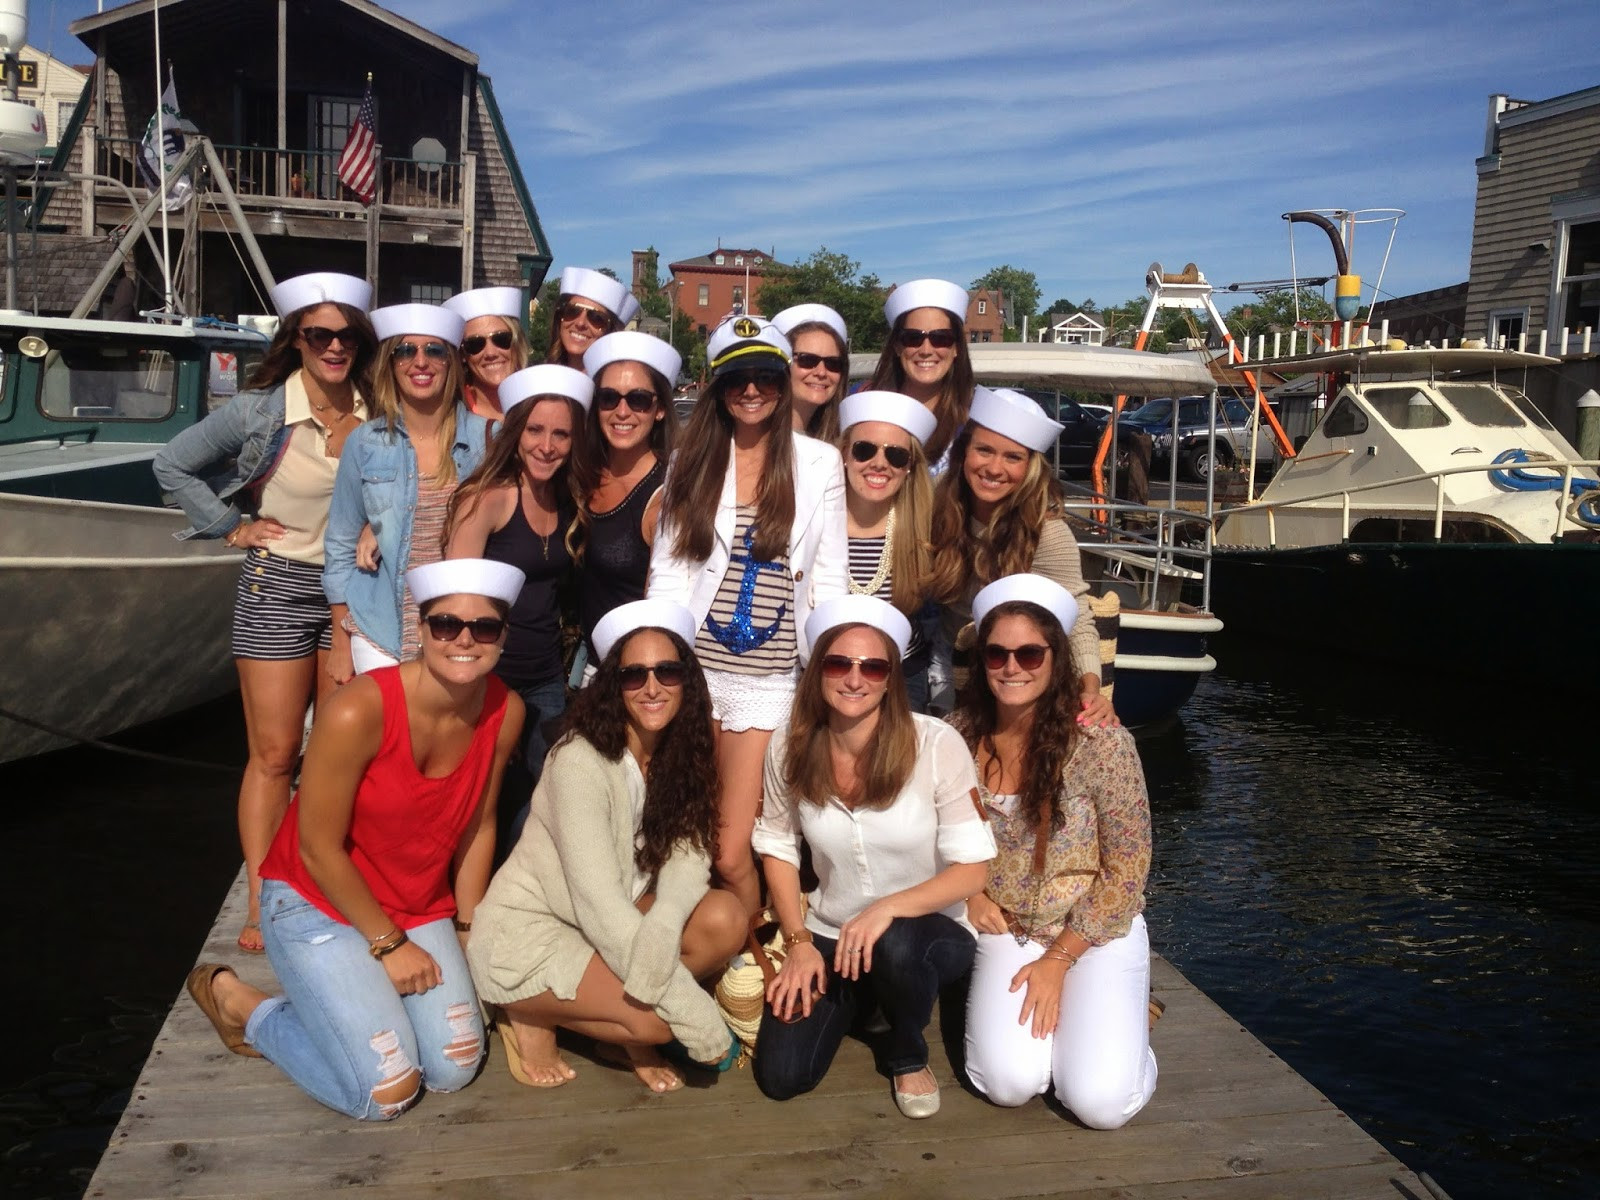 Destination Bachelorette Party Ideas Winery And Beach
 Why Newport is the Perfect Bachelorette Destination